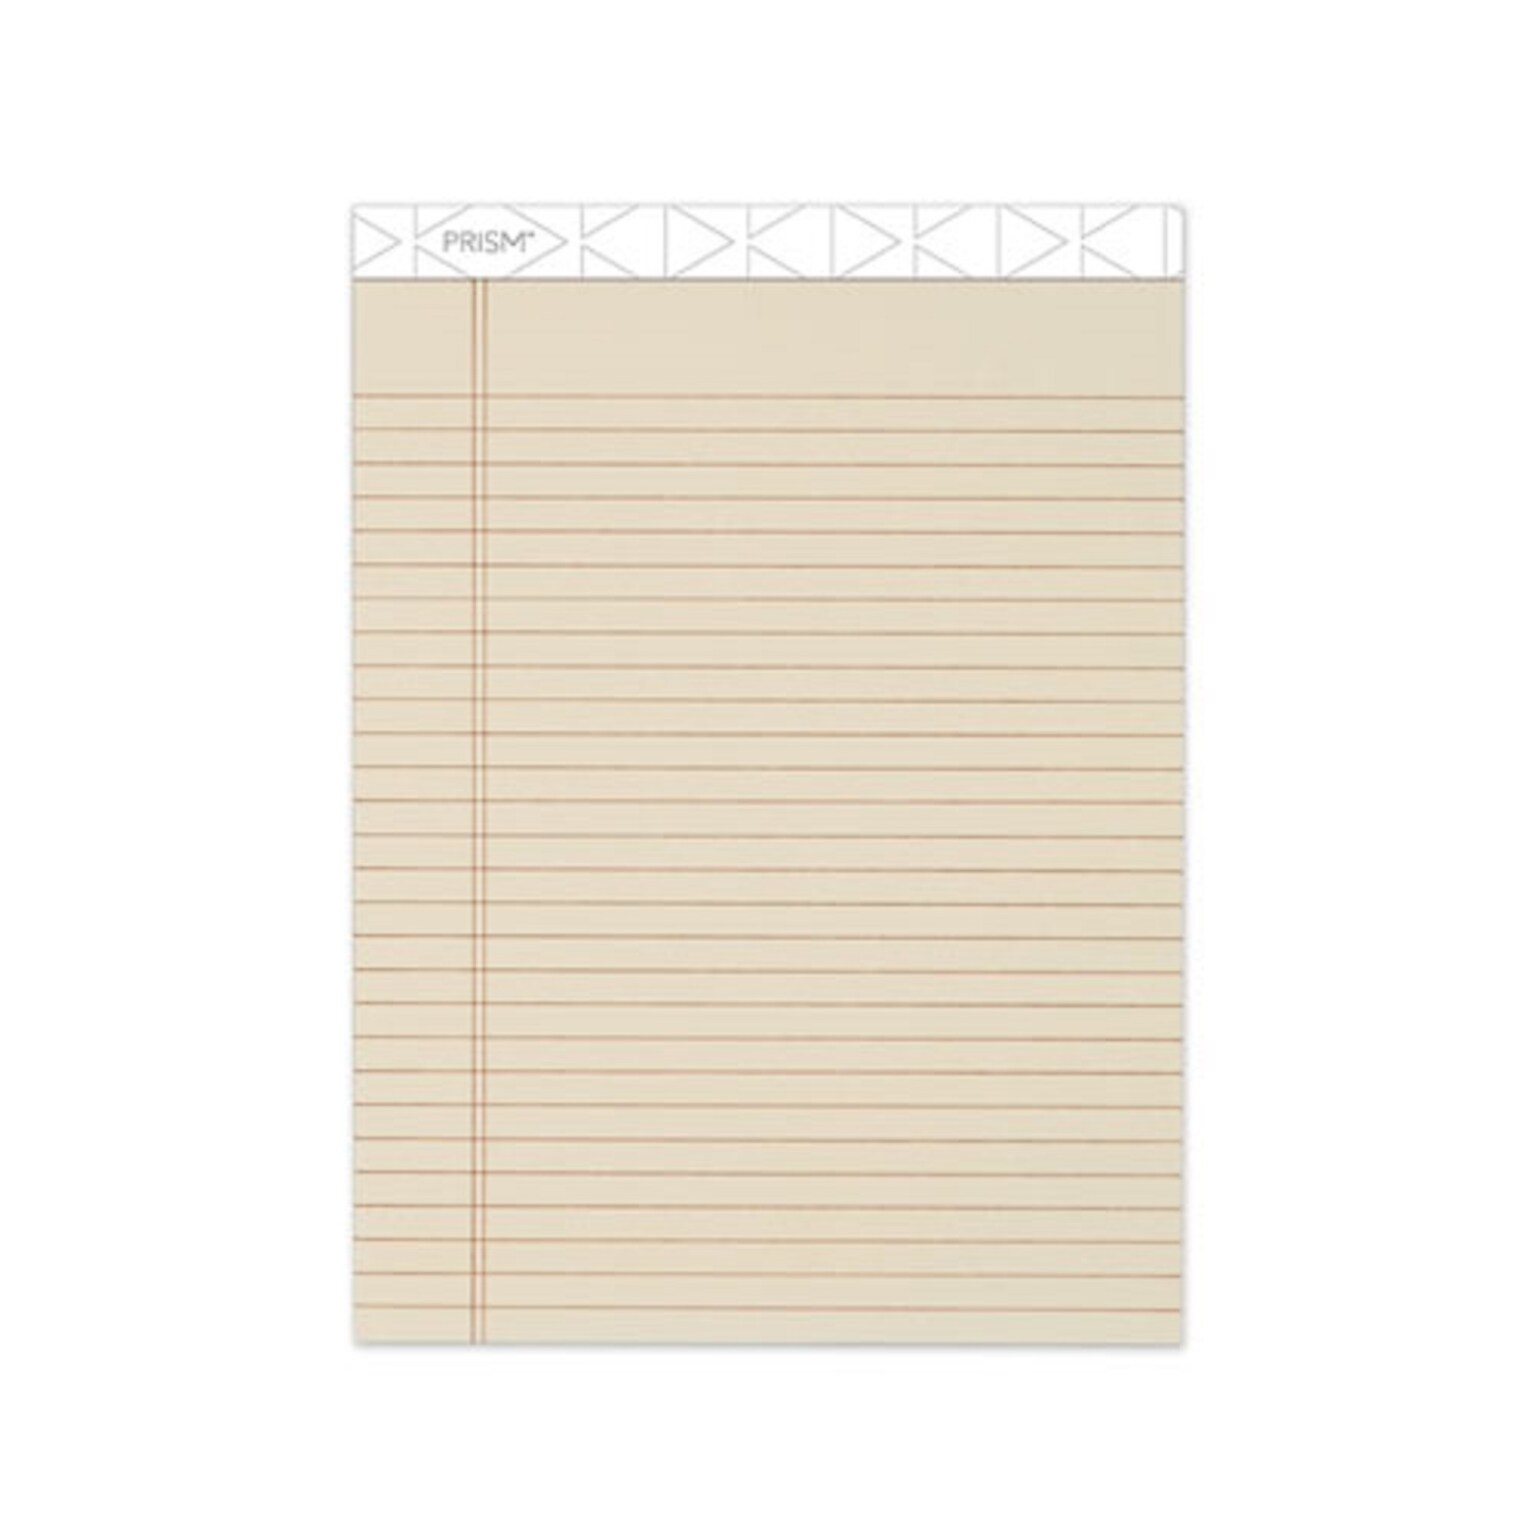 TOPS Prism+ Writing Notepads, 8-1/2 x 11-3/4, Legal Ruled, Ivory, 50 Sheets/Pad, 12 Pads/Pack (63130)